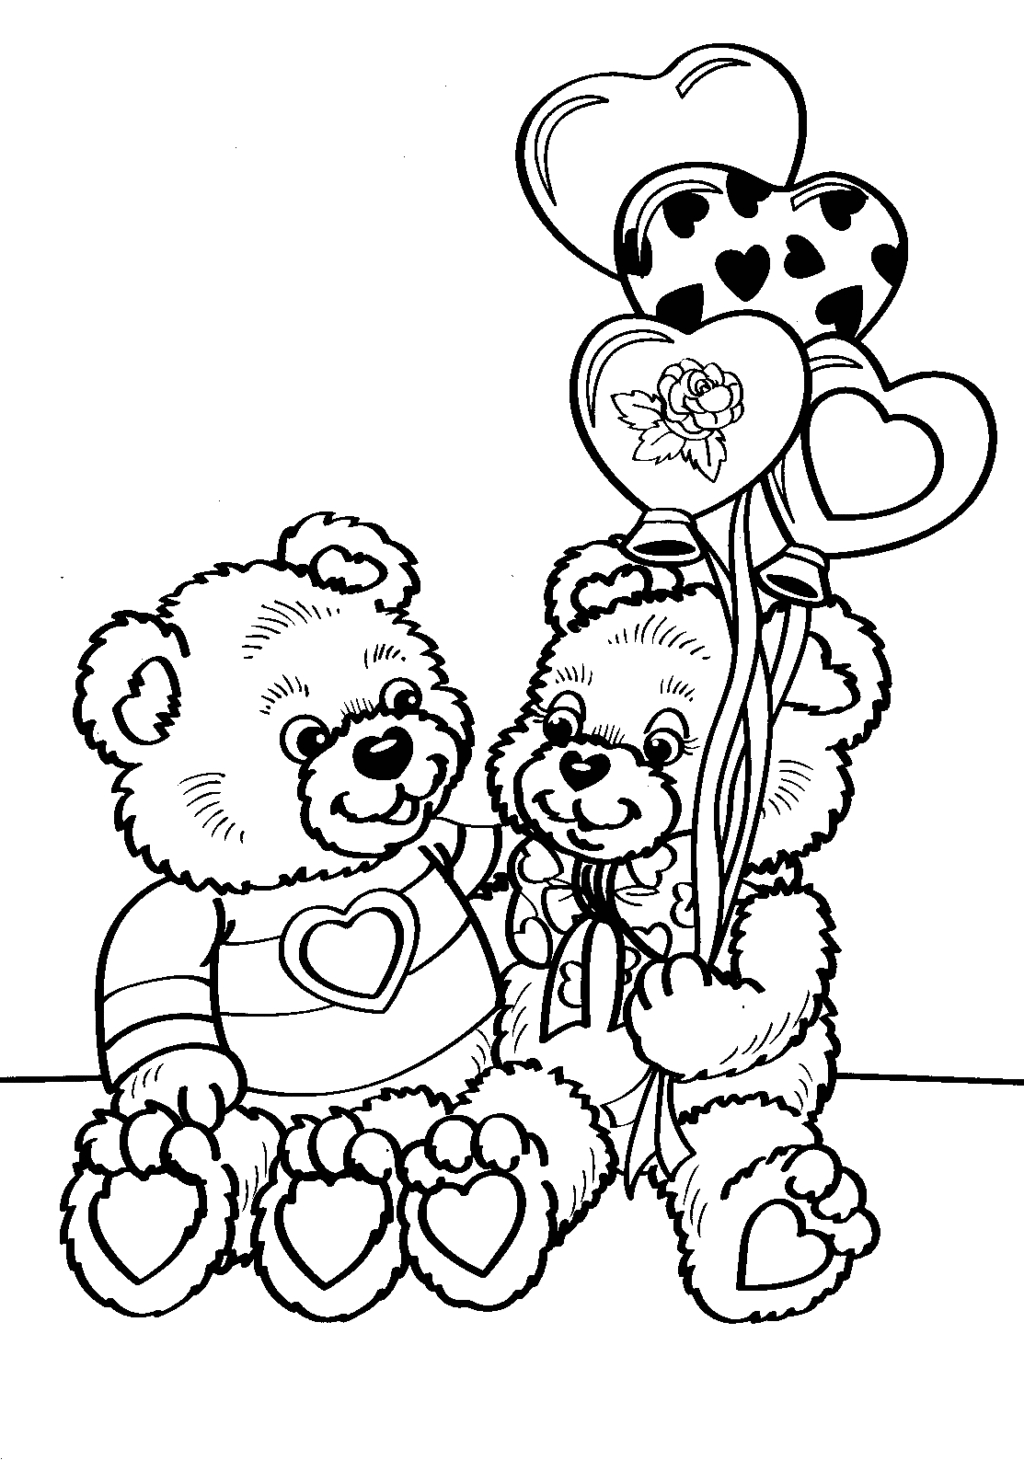 Preschool Valentines Day Coloring Pages Coloring Book World Valentines Day Coloring Pages Printable For